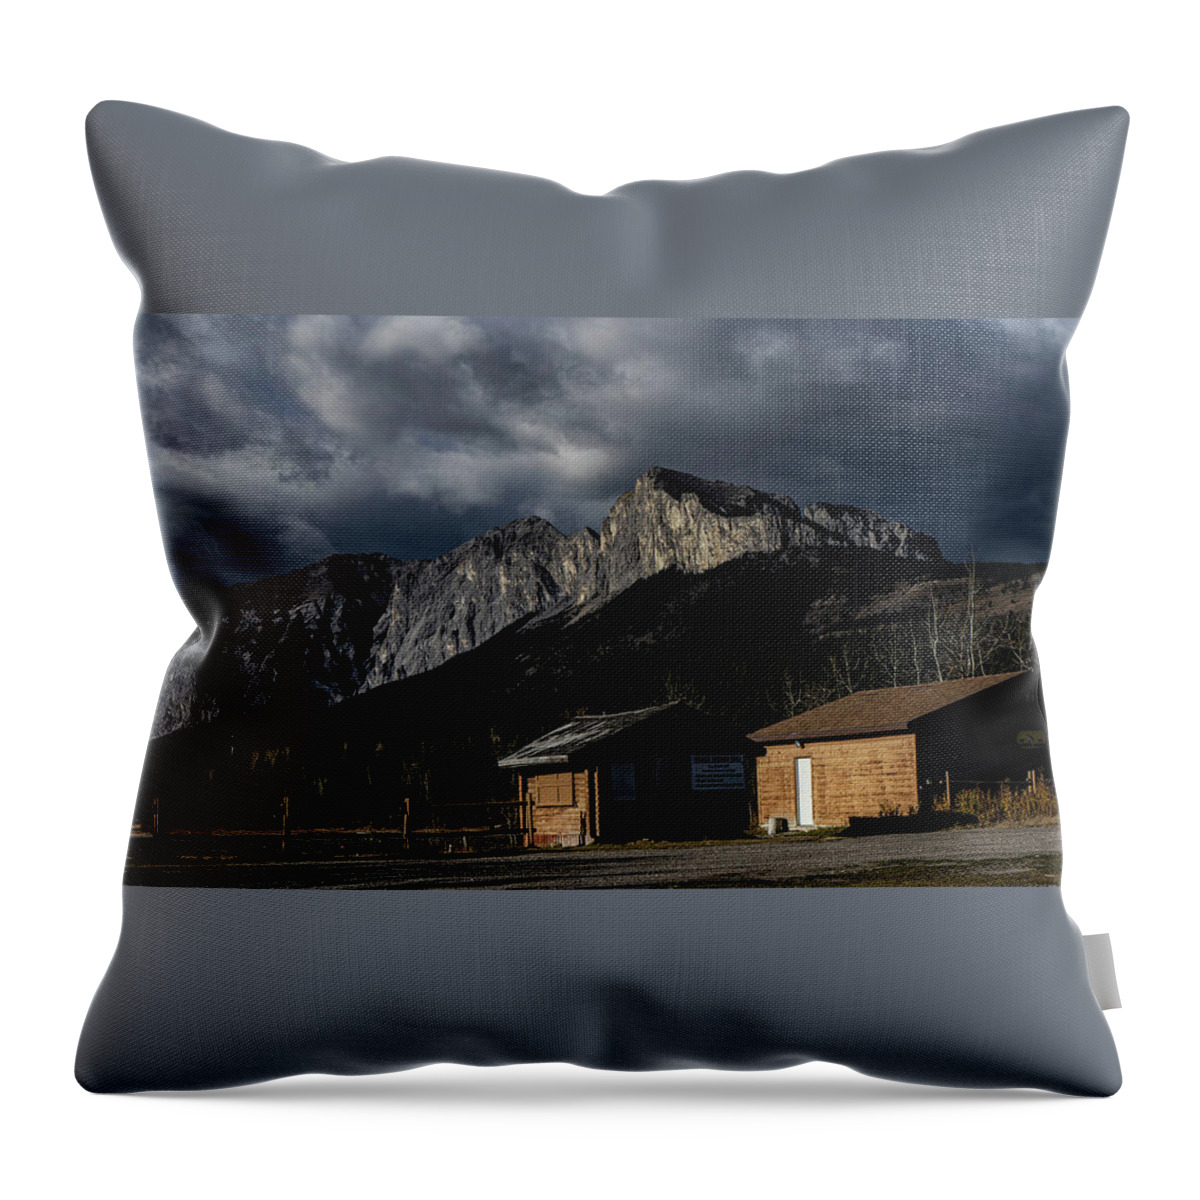 Digital Art Throw Pillow featuring the photograph Morning Travels by Jerald Blackstock